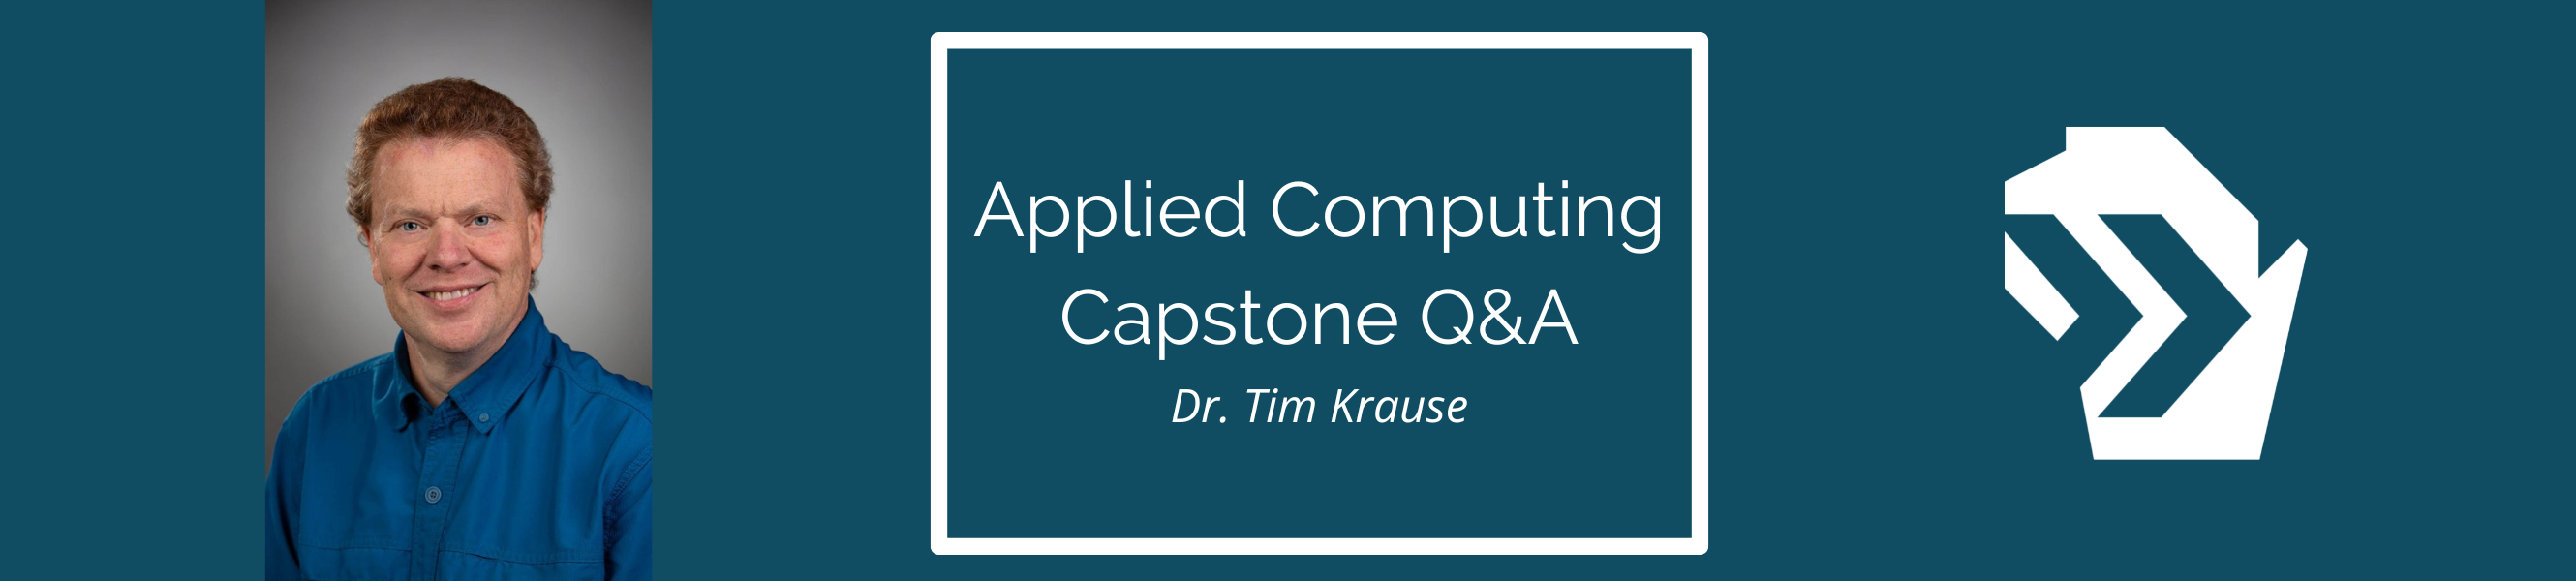 A graphic including a professional headshot of Dr. Tim Krause, who guides students through the computing capstone.